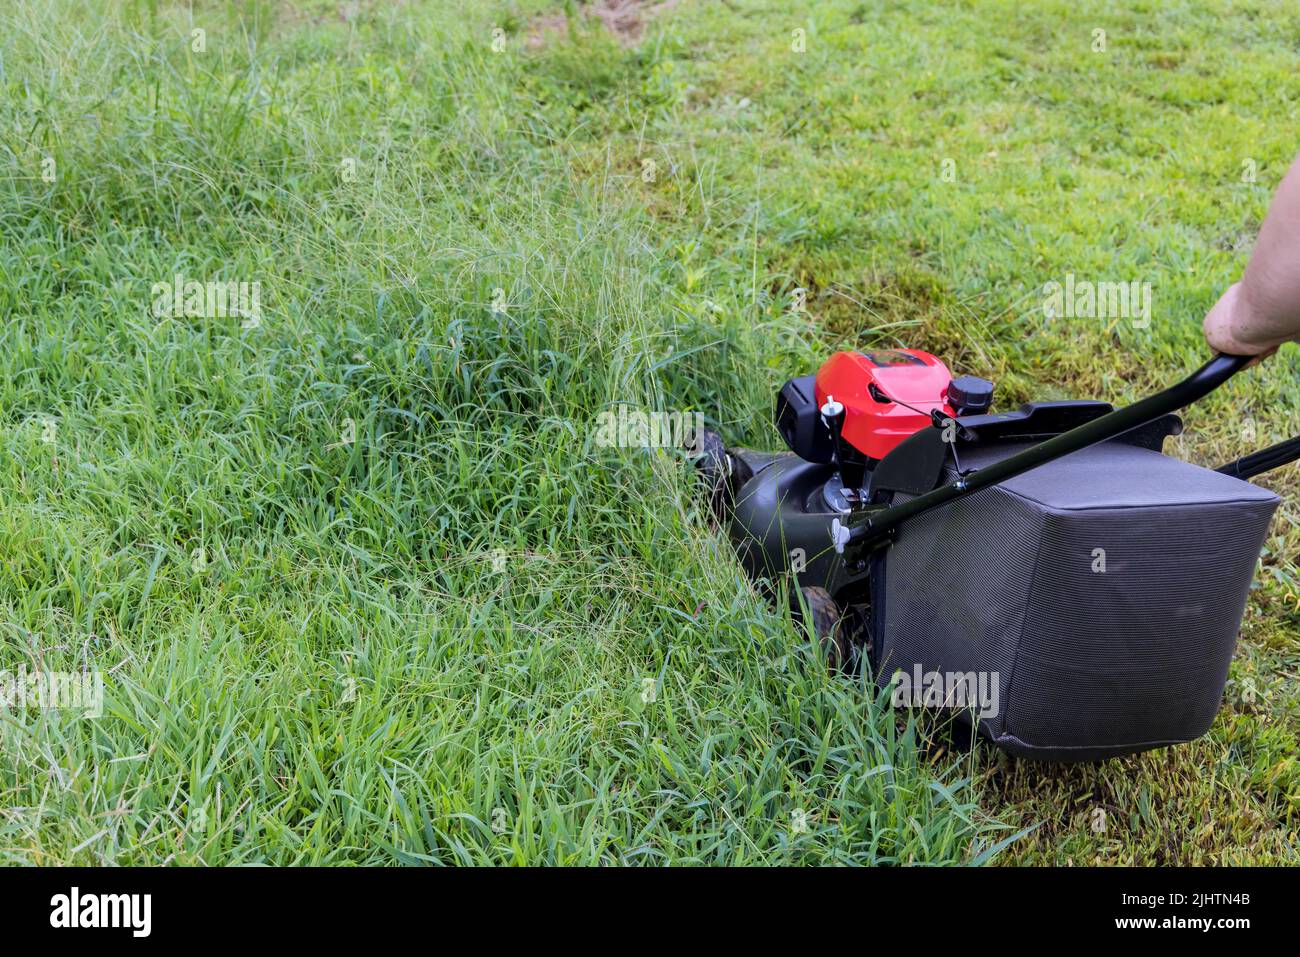 A garden care work tool used for cutting grass on a green lawn with a lawn mower in motion Stock Photo